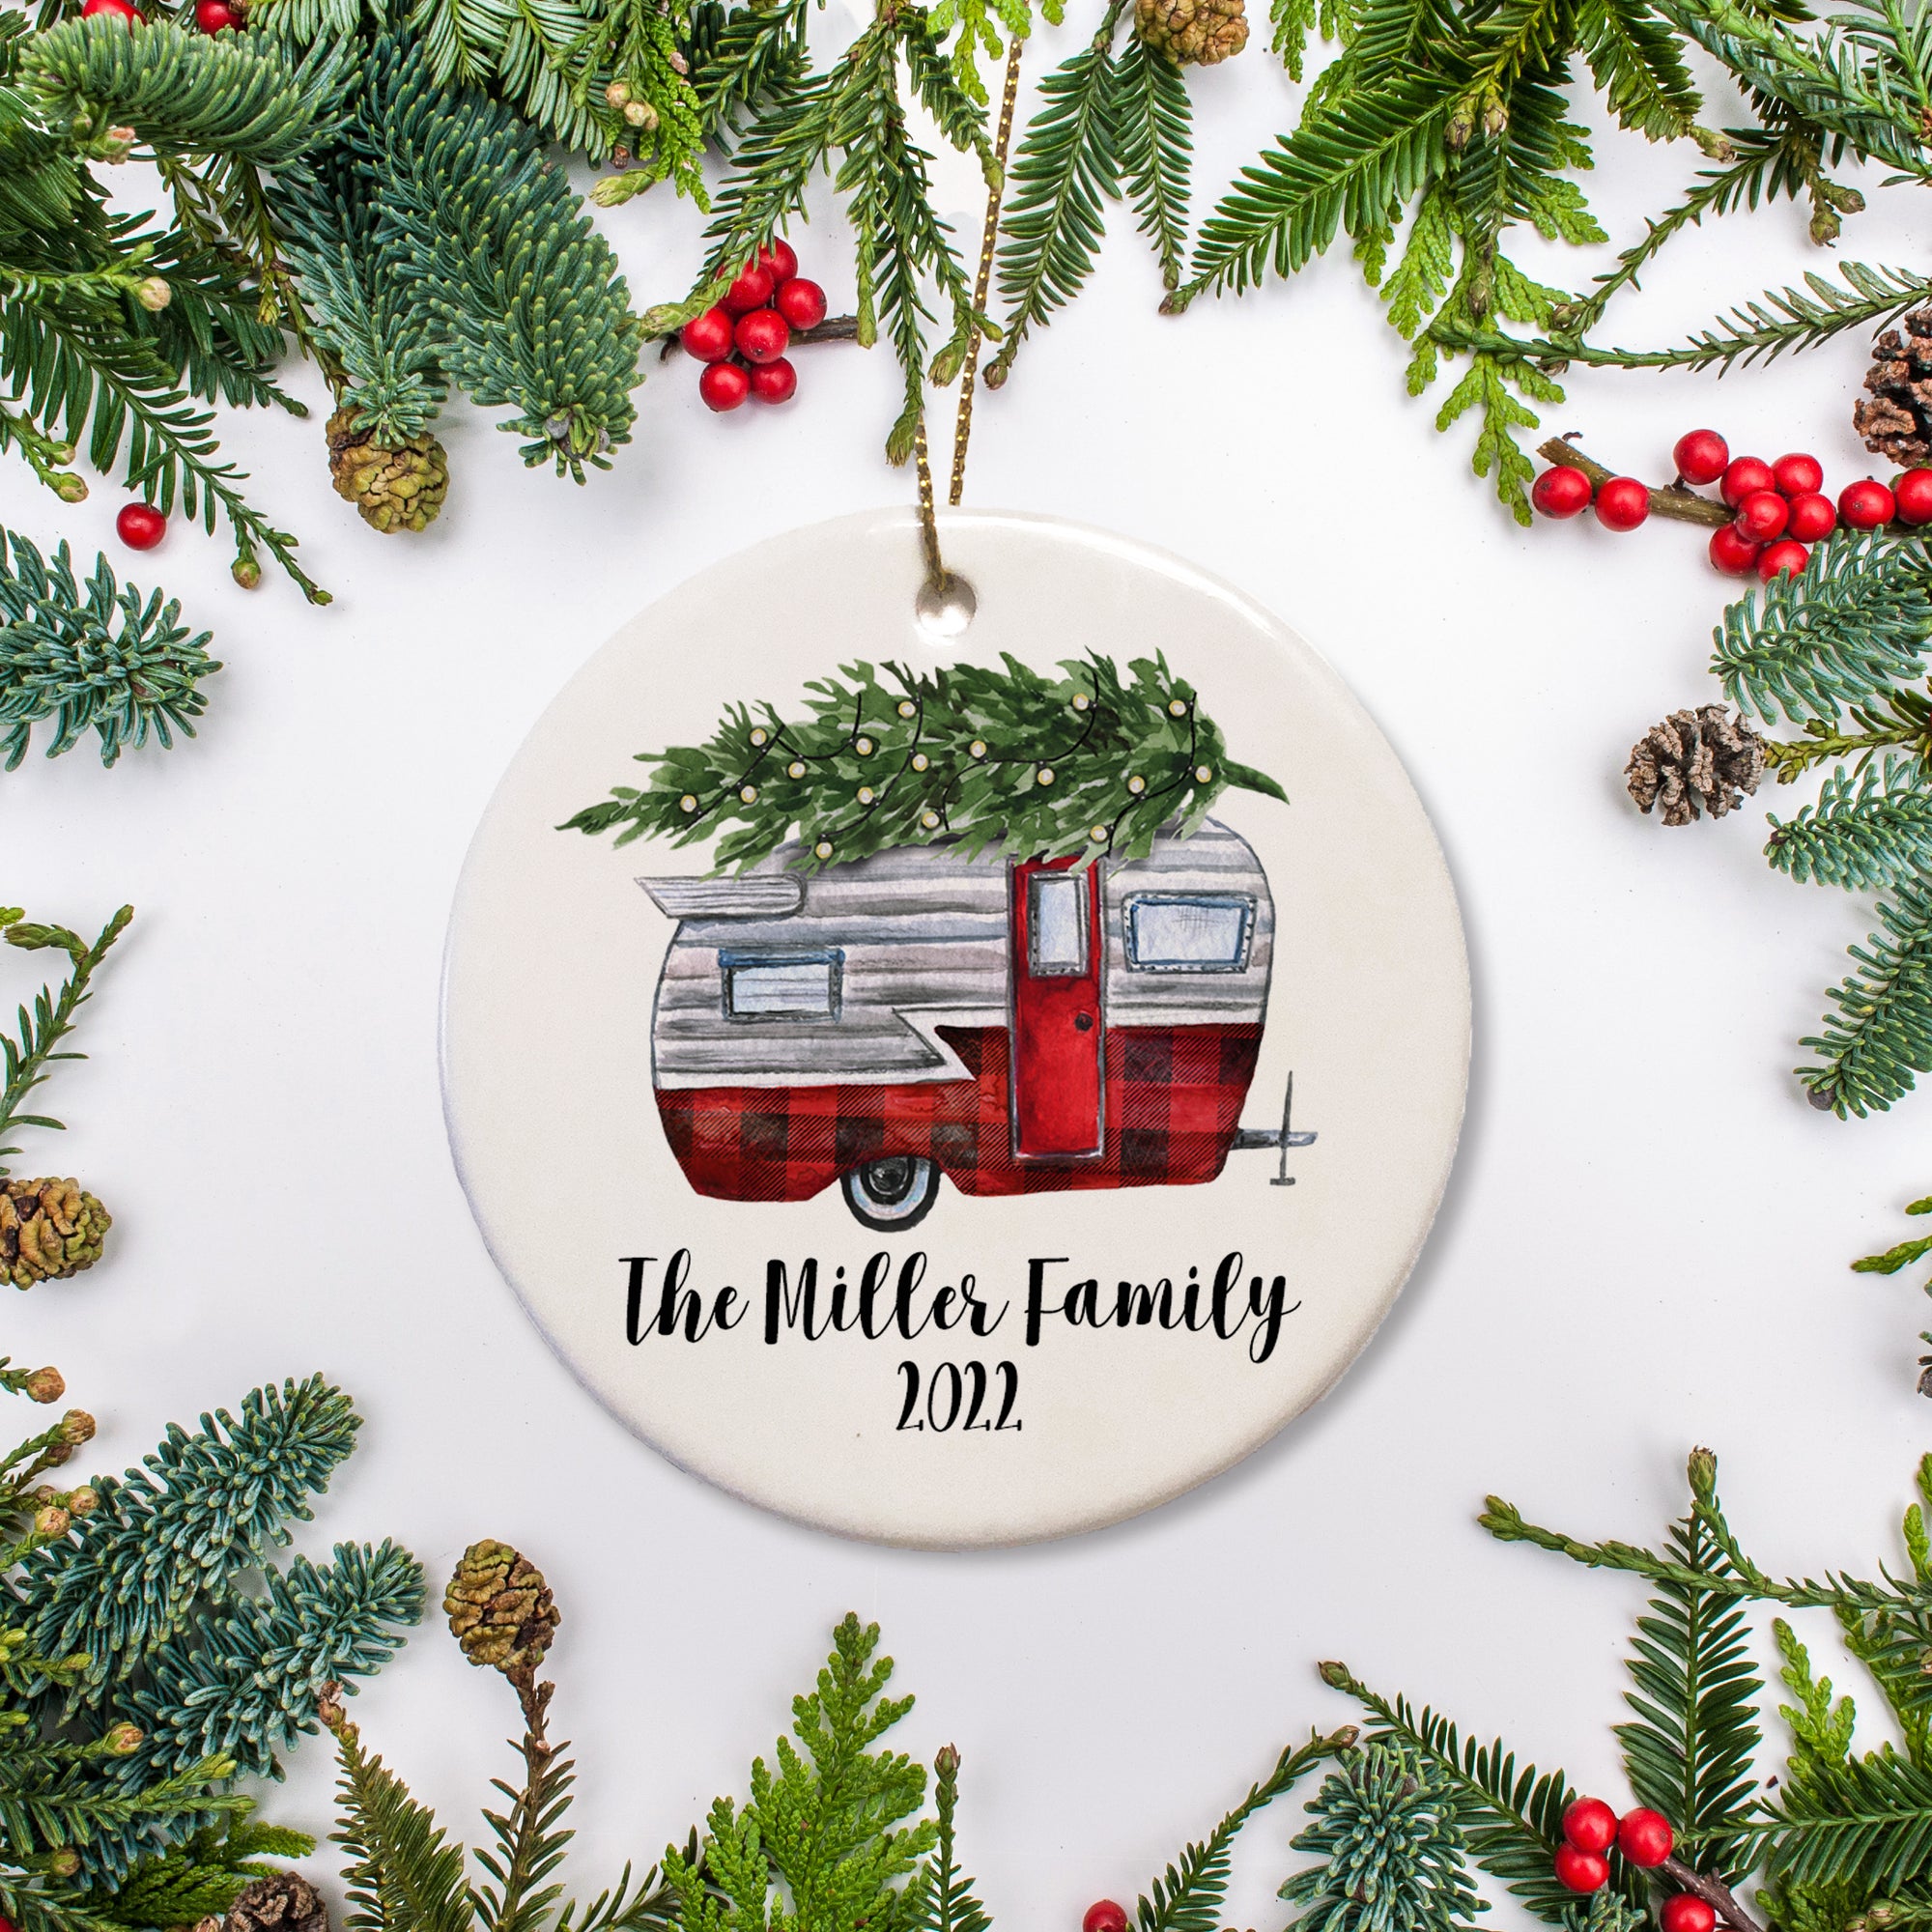 Personalized Christmas ornament with classic camper carrying a Christmas tree. Buffalo plaid and silver colors. Add family name and year of your choice. PIPSY.COM